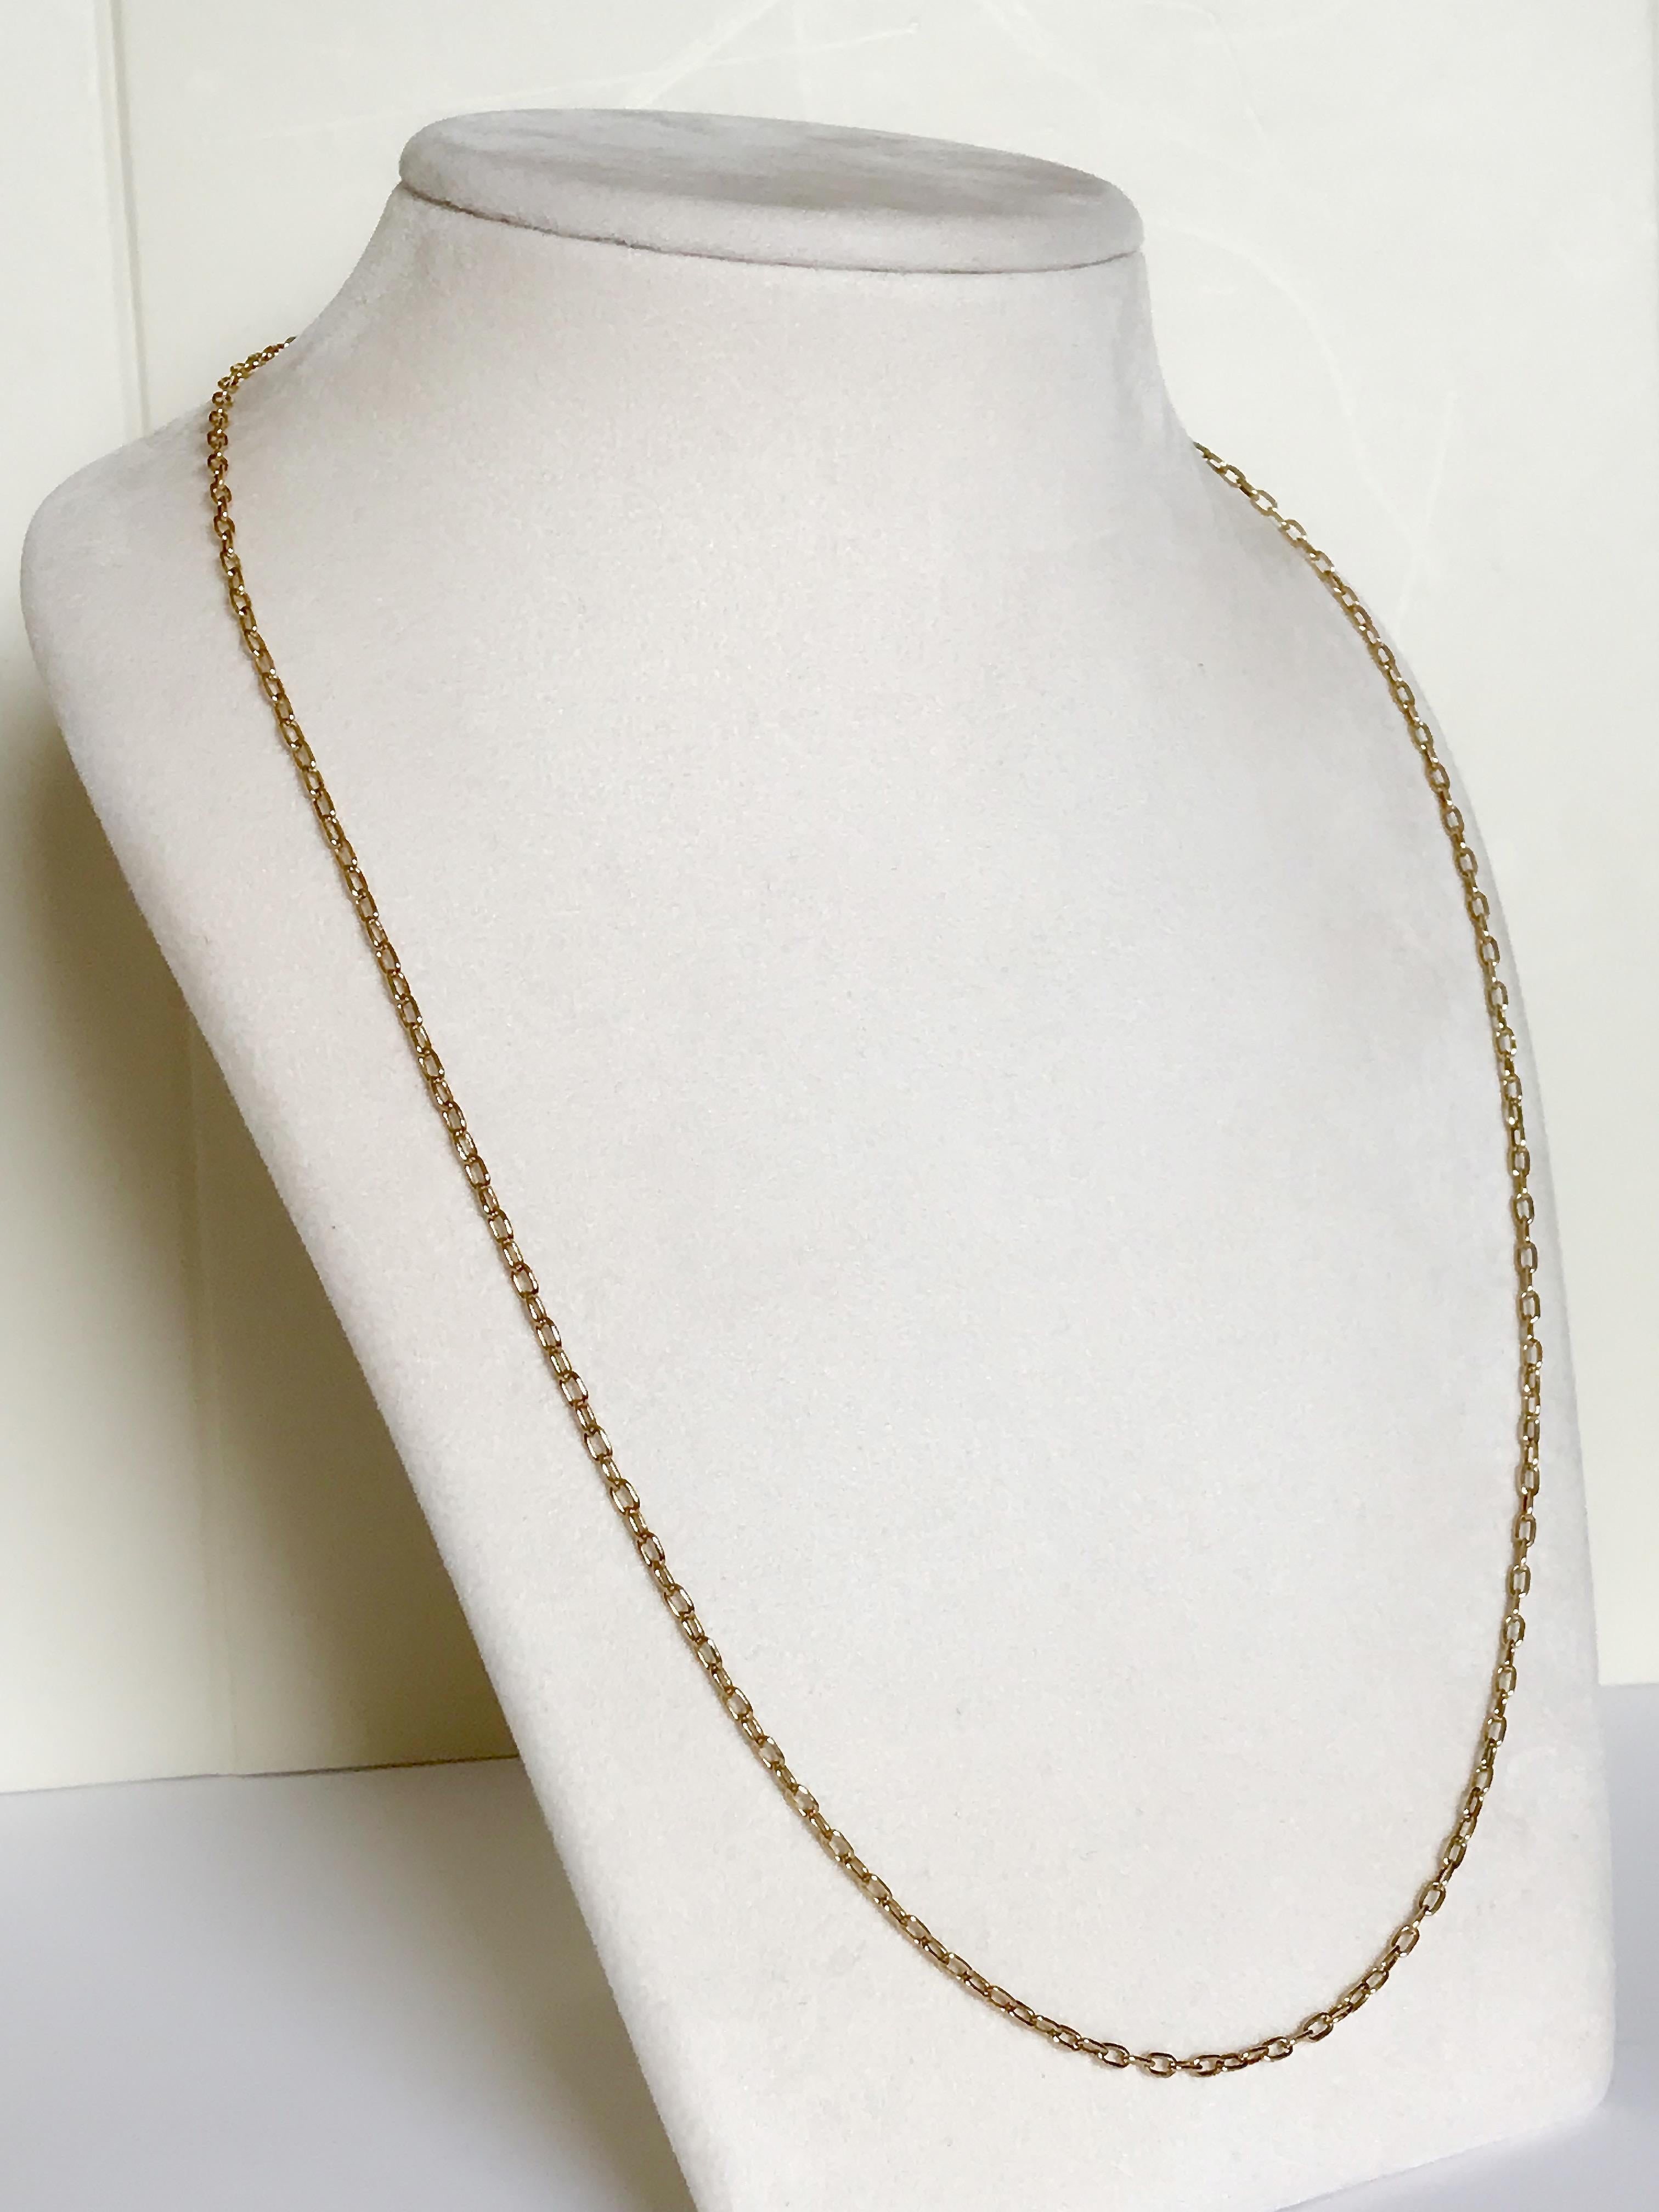 Women's or Men's 18 Karat Solid Yellow Gold Cable Chain Necklace